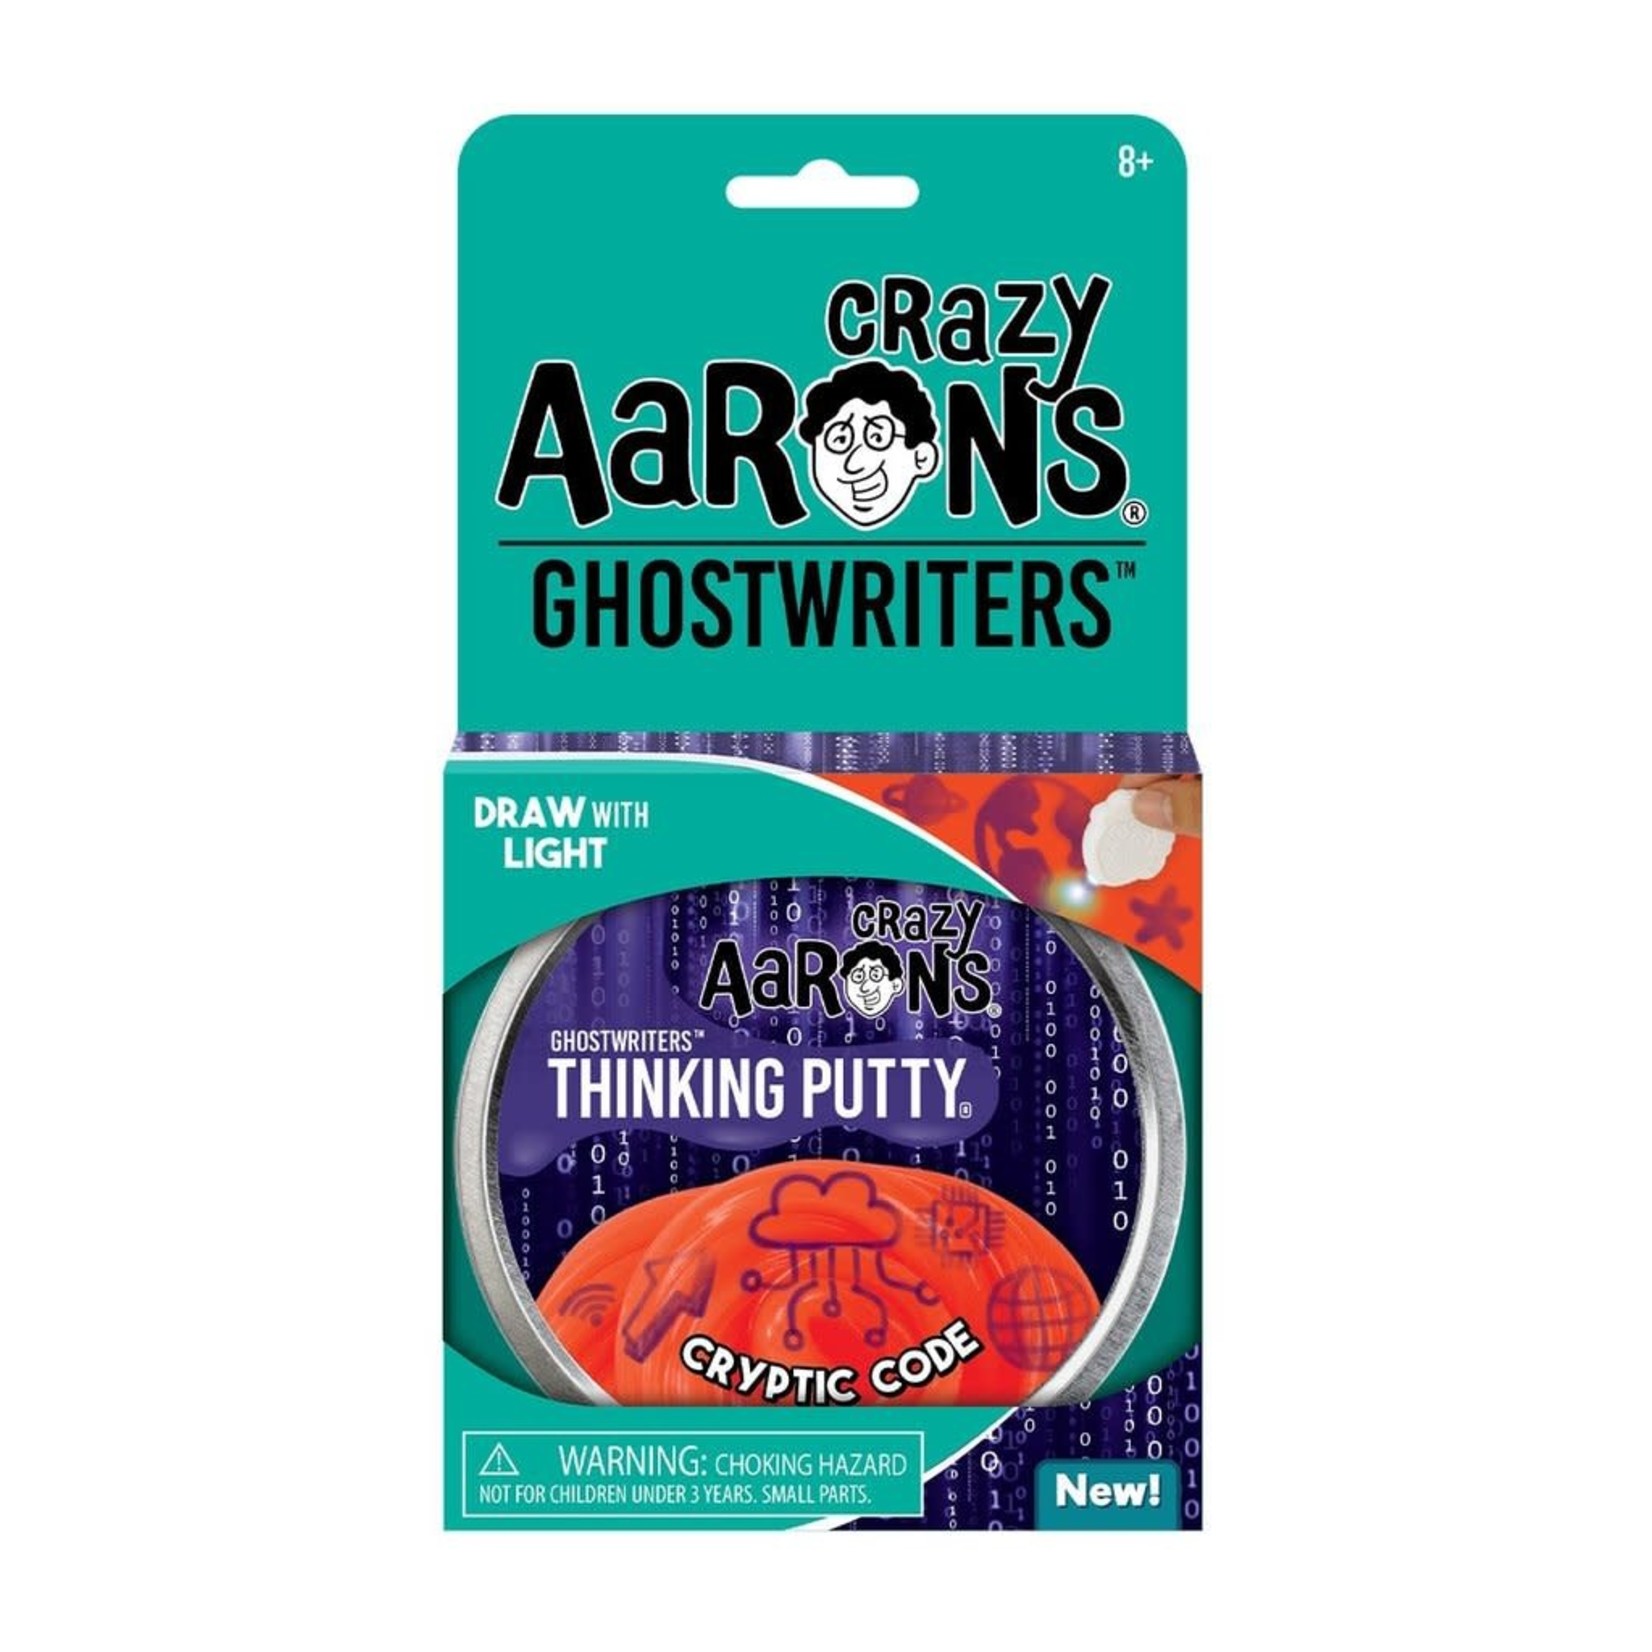 Crazy Aaron's Thinking Putty Cryptic Code Thinking Putty